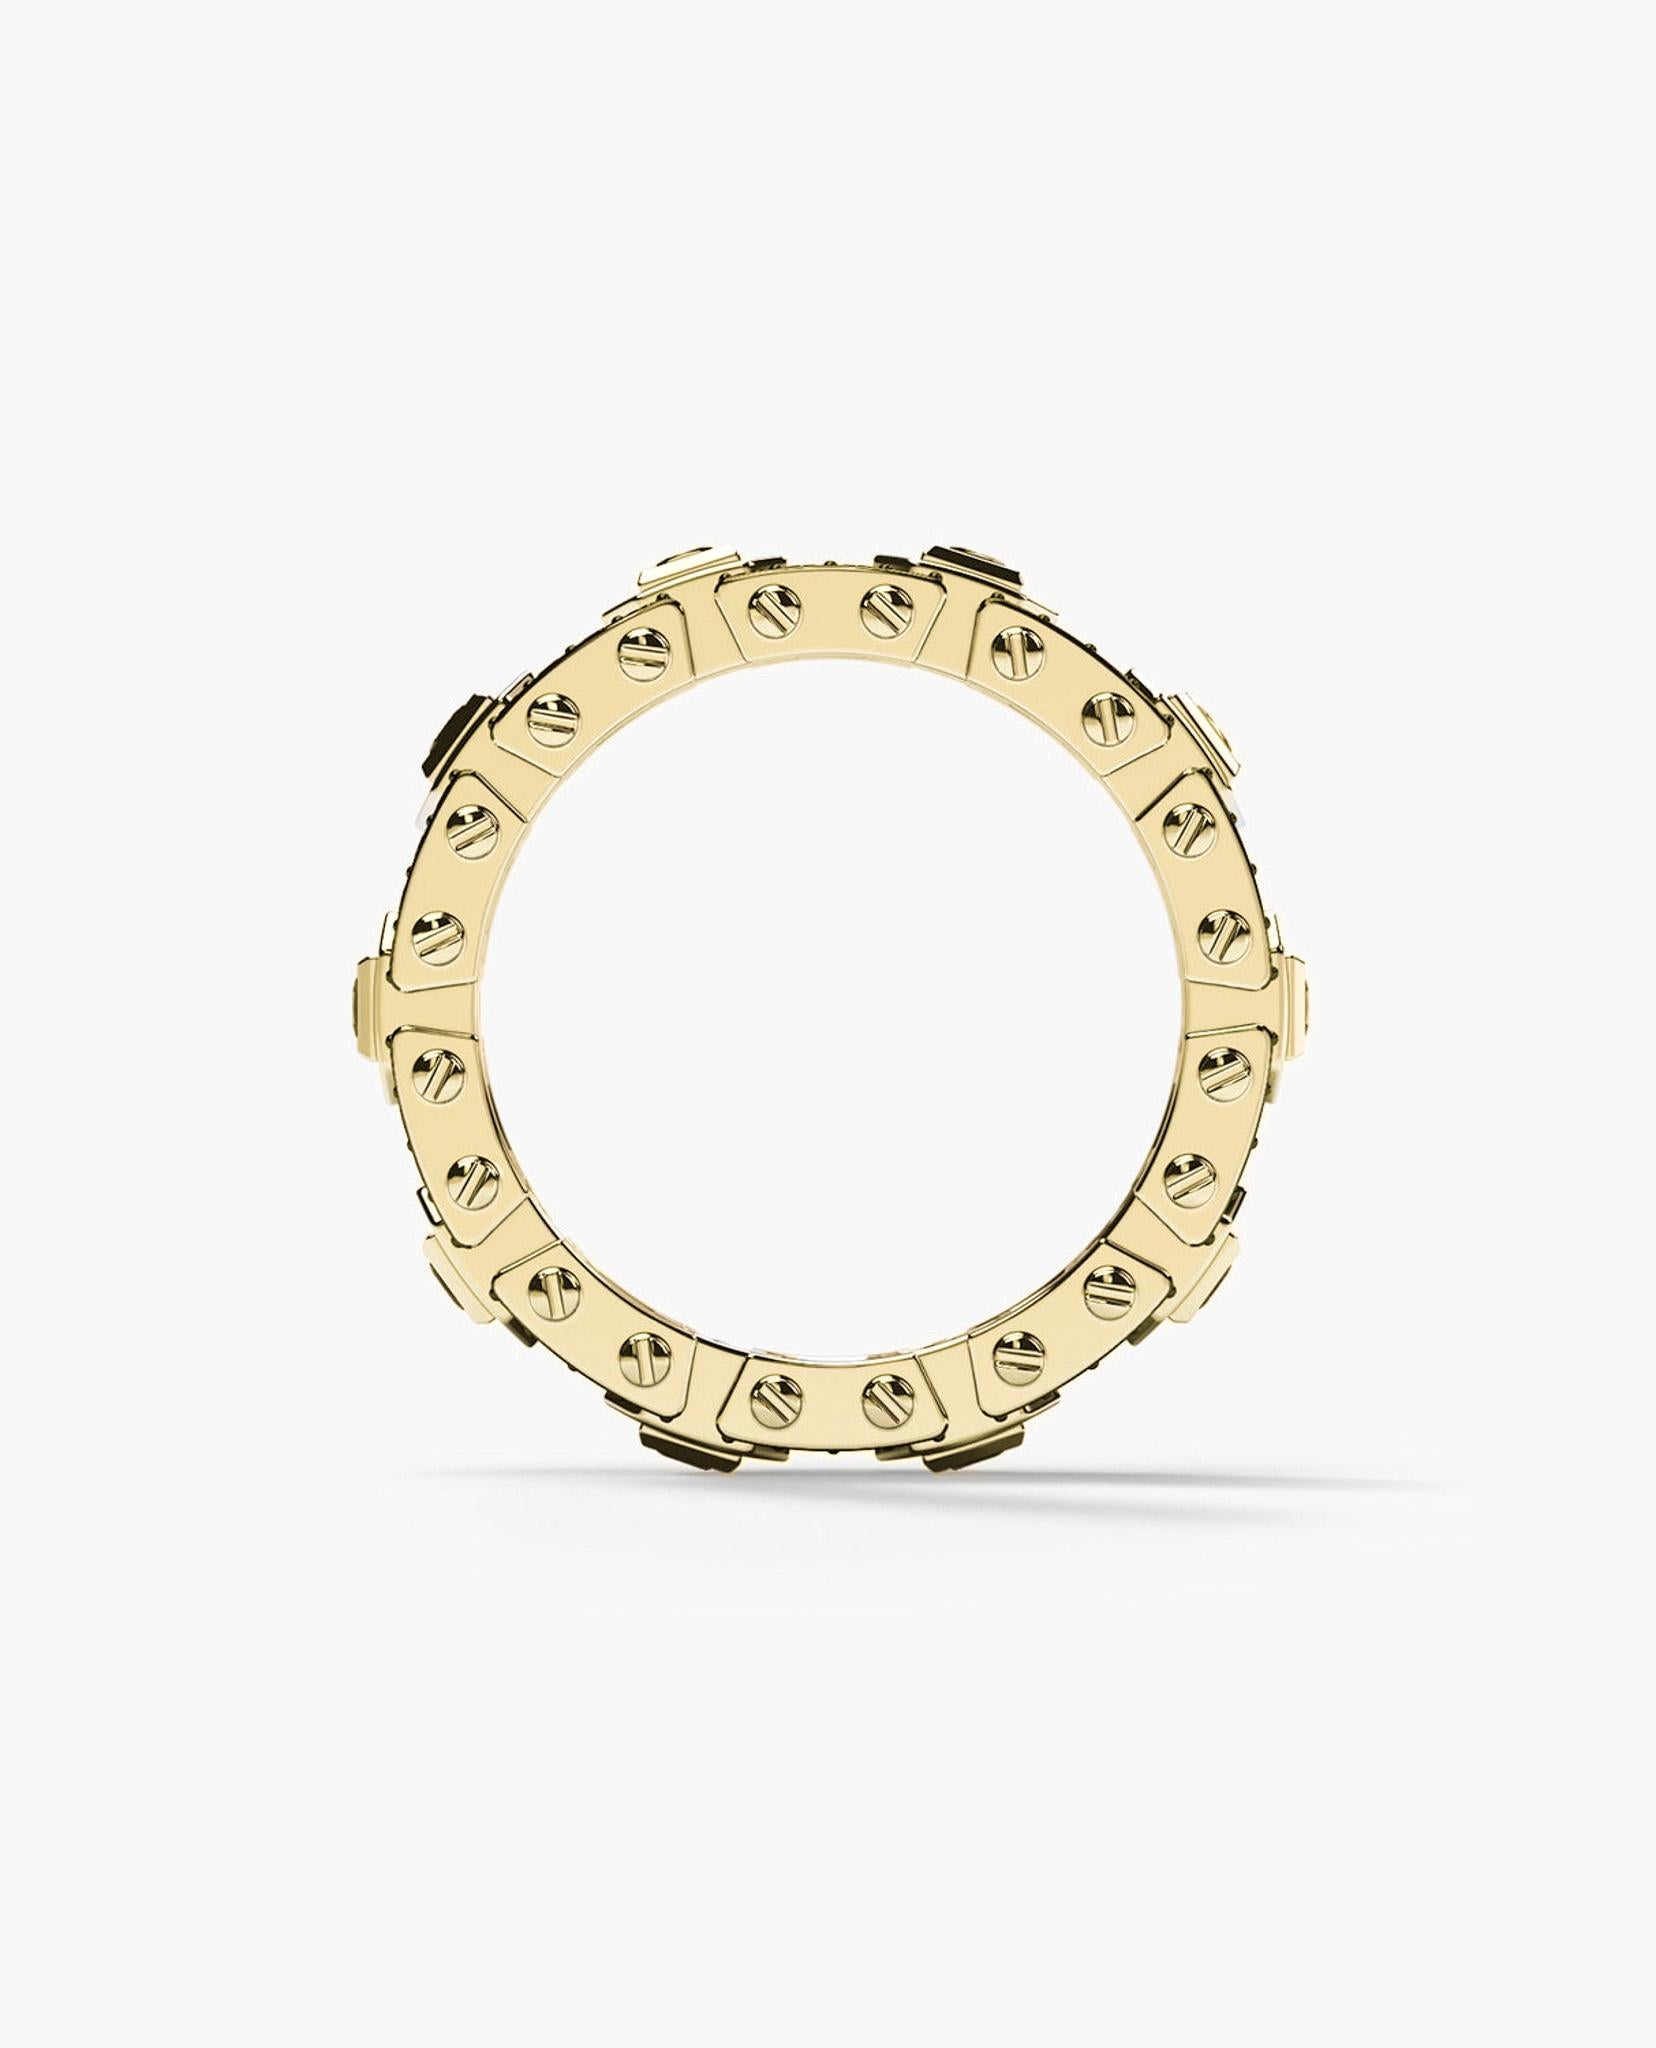 Contemporary LA PAZ 14k Yellow Gold Wedding Ring with 1.20ct Diamonds for Women and Men